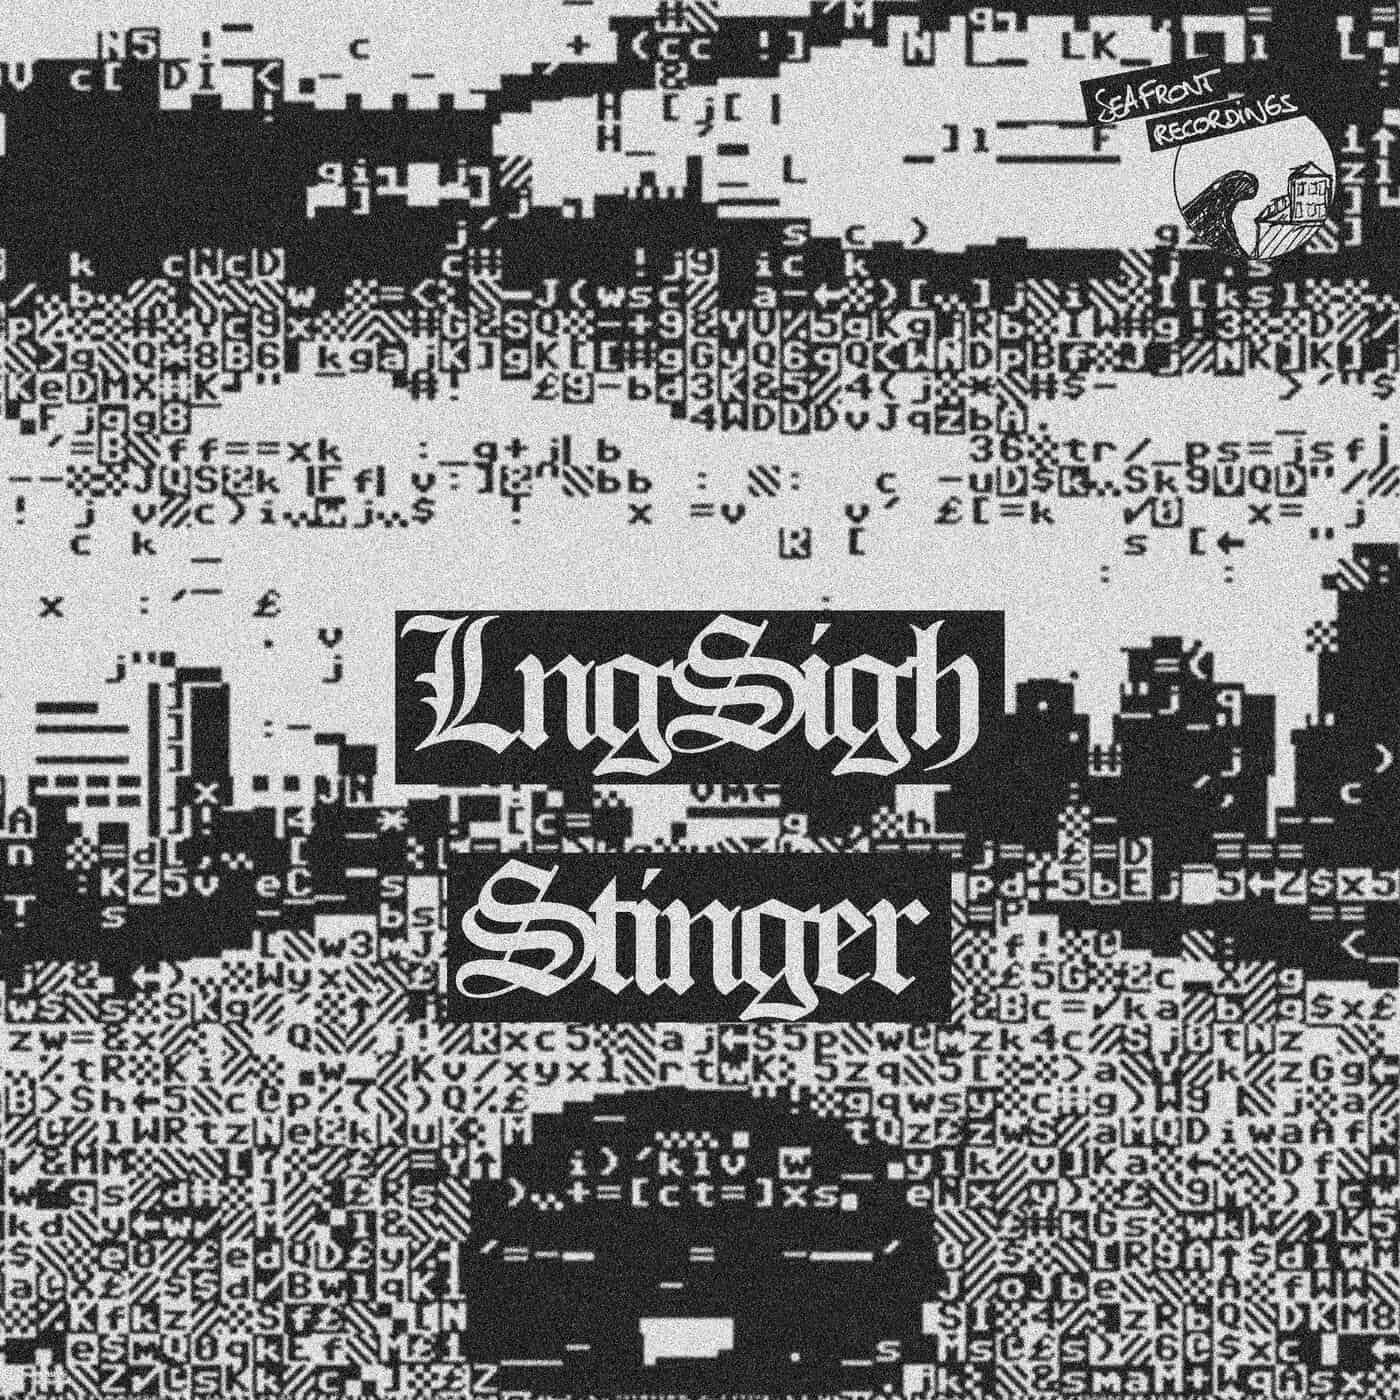 Download Lngsigh, Little by Little - Stinger on Electrobuzz